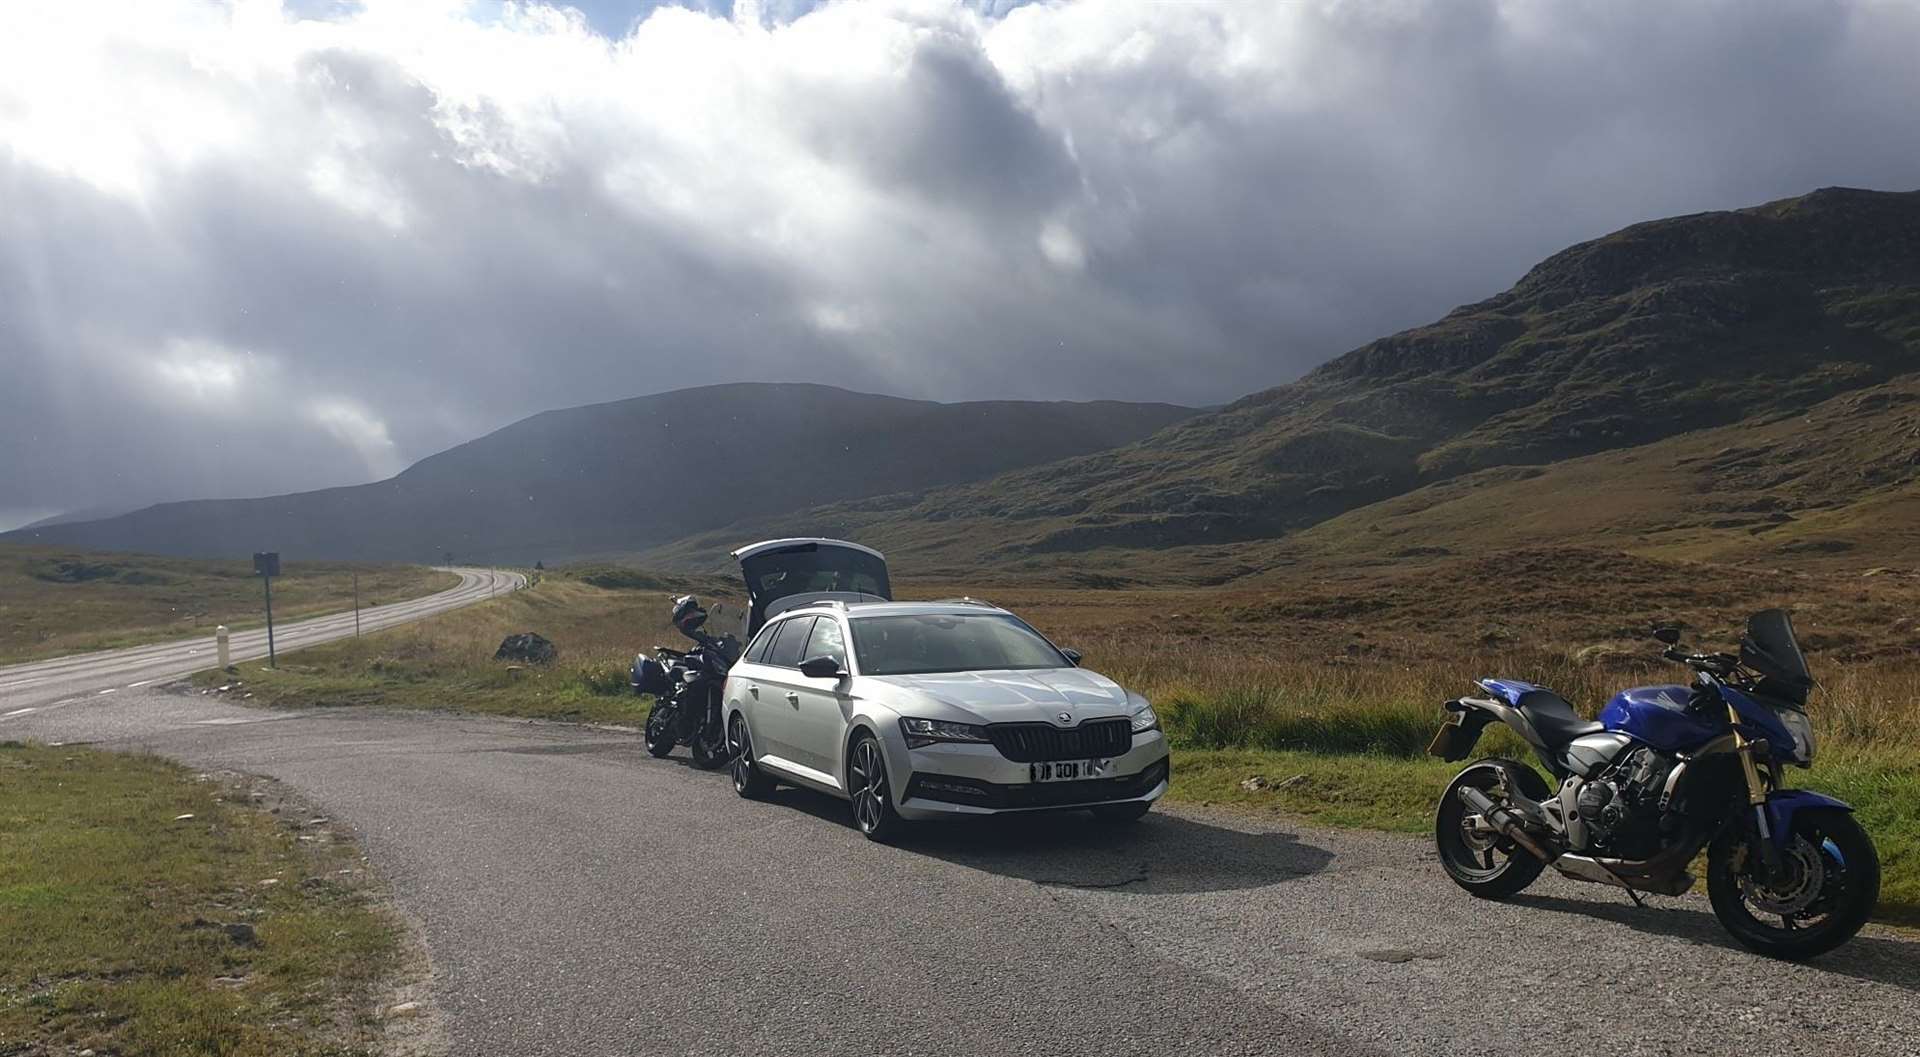 Locations where officers spread their safety message included the layby between Loch Droma and the Braemore Junction on the A835 Dingwall-Ullapool road. Picture Police Scotland.